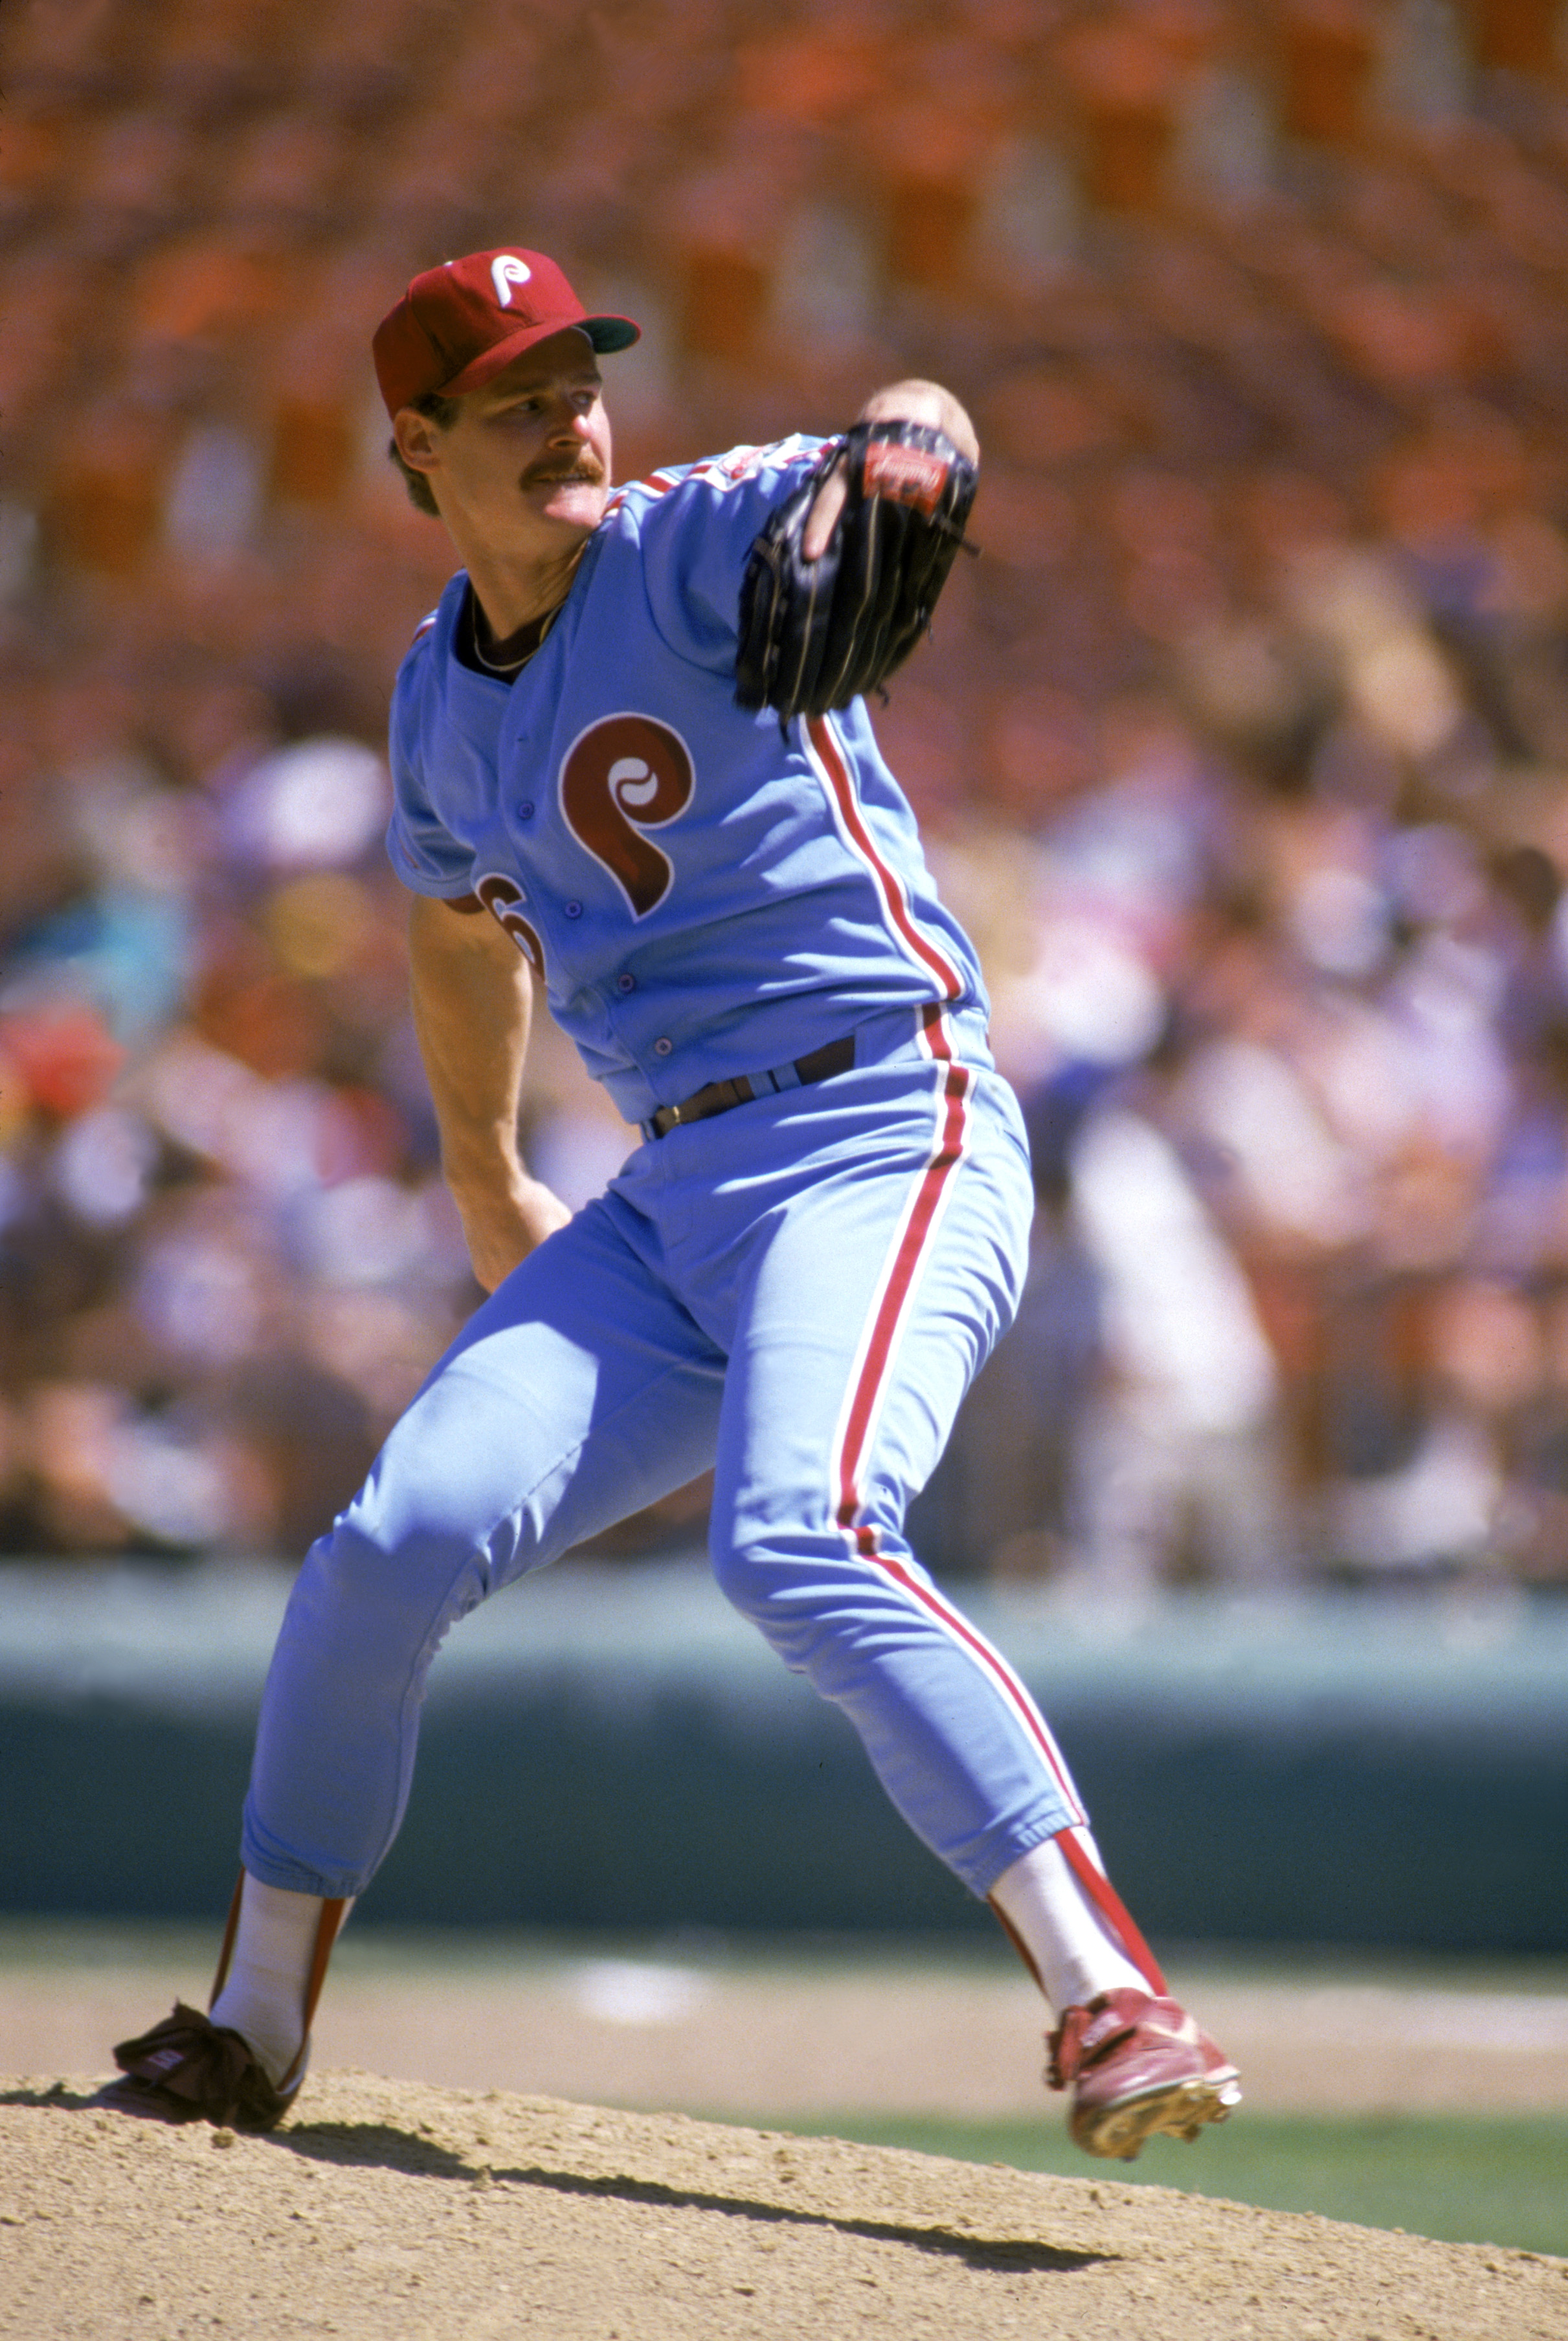 SAN DIEGO - 1987:  Kevin Gross of the Philadelphia Phillies pitches during the 1987 season MLB game against the San Diego Padres at Jack Murphy Stadium in San Diego, California.  (Photo by Stephen Dunn/Getty Images)